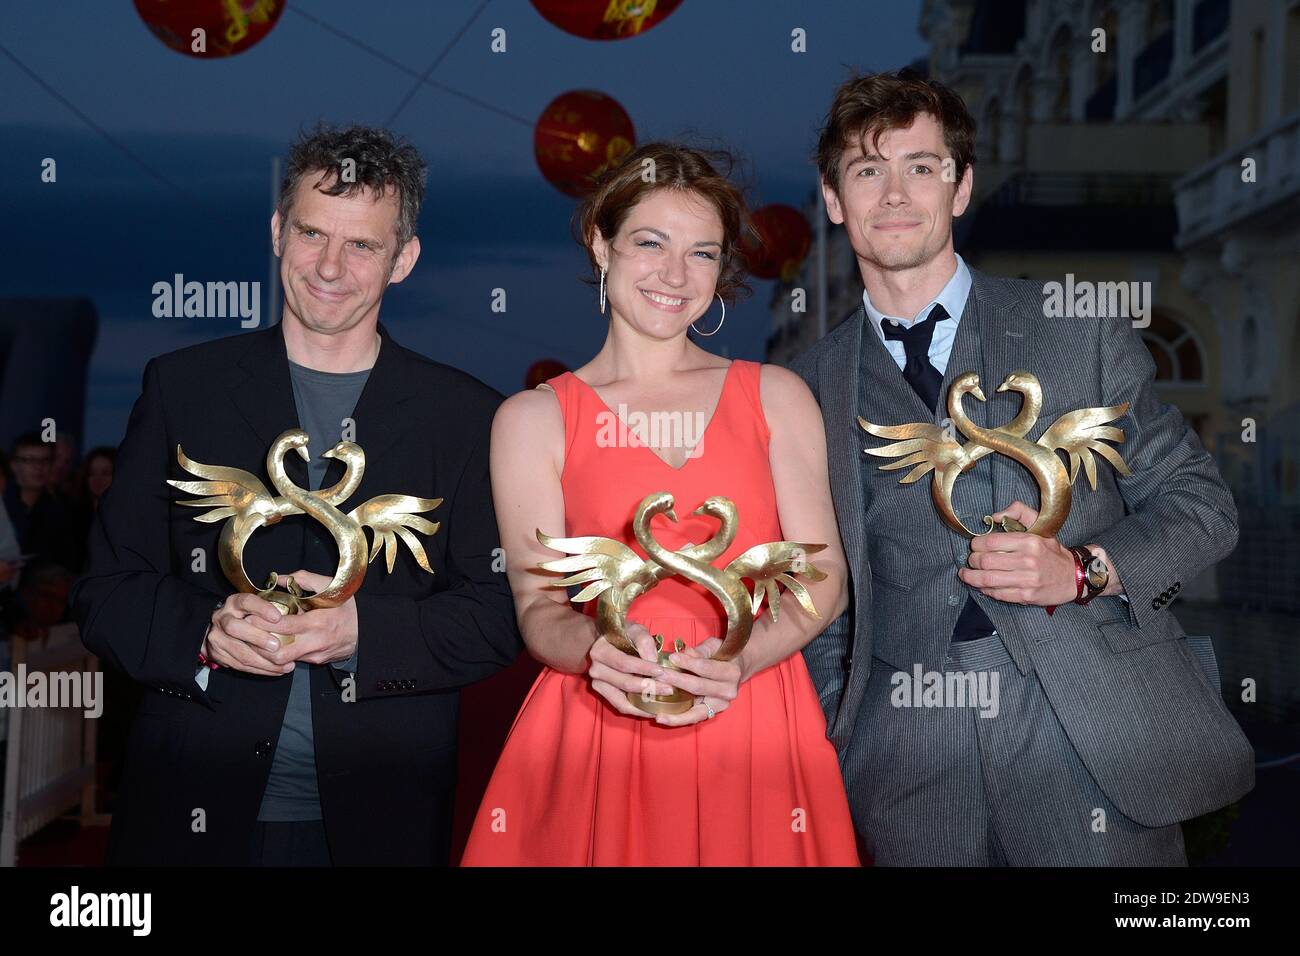 Lucas Belvaux, Emilie Dequenne and Loic Corbery attending the closing ceremony of the 28th Cabourg Romantic Film Festival in Cabourg, France on June 14, 2014. Photo by Nicolas Briquet/ABACAPRESS.COM Stock Photo